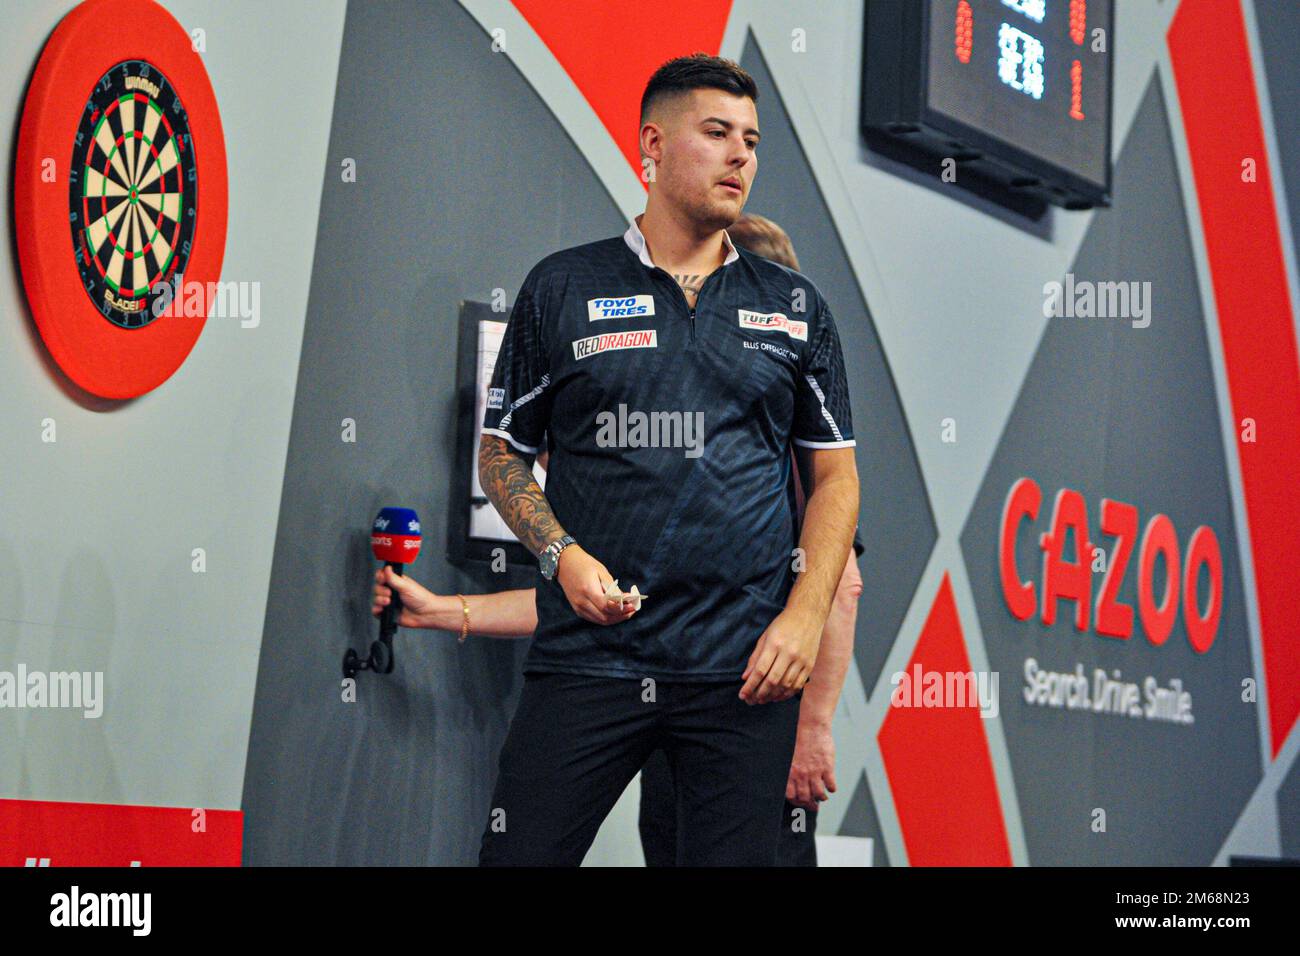 LONDON, UNITED KINGDOM - DECEMBER 21: Ryan Meikle of England reacts during Day Six of the Cazoo World Darts Championship at Alexandra Palace on December 20, 2022 in London, United Kingdom. (Photo by Pieter Verbeek/BSR Agency) Stock Photo